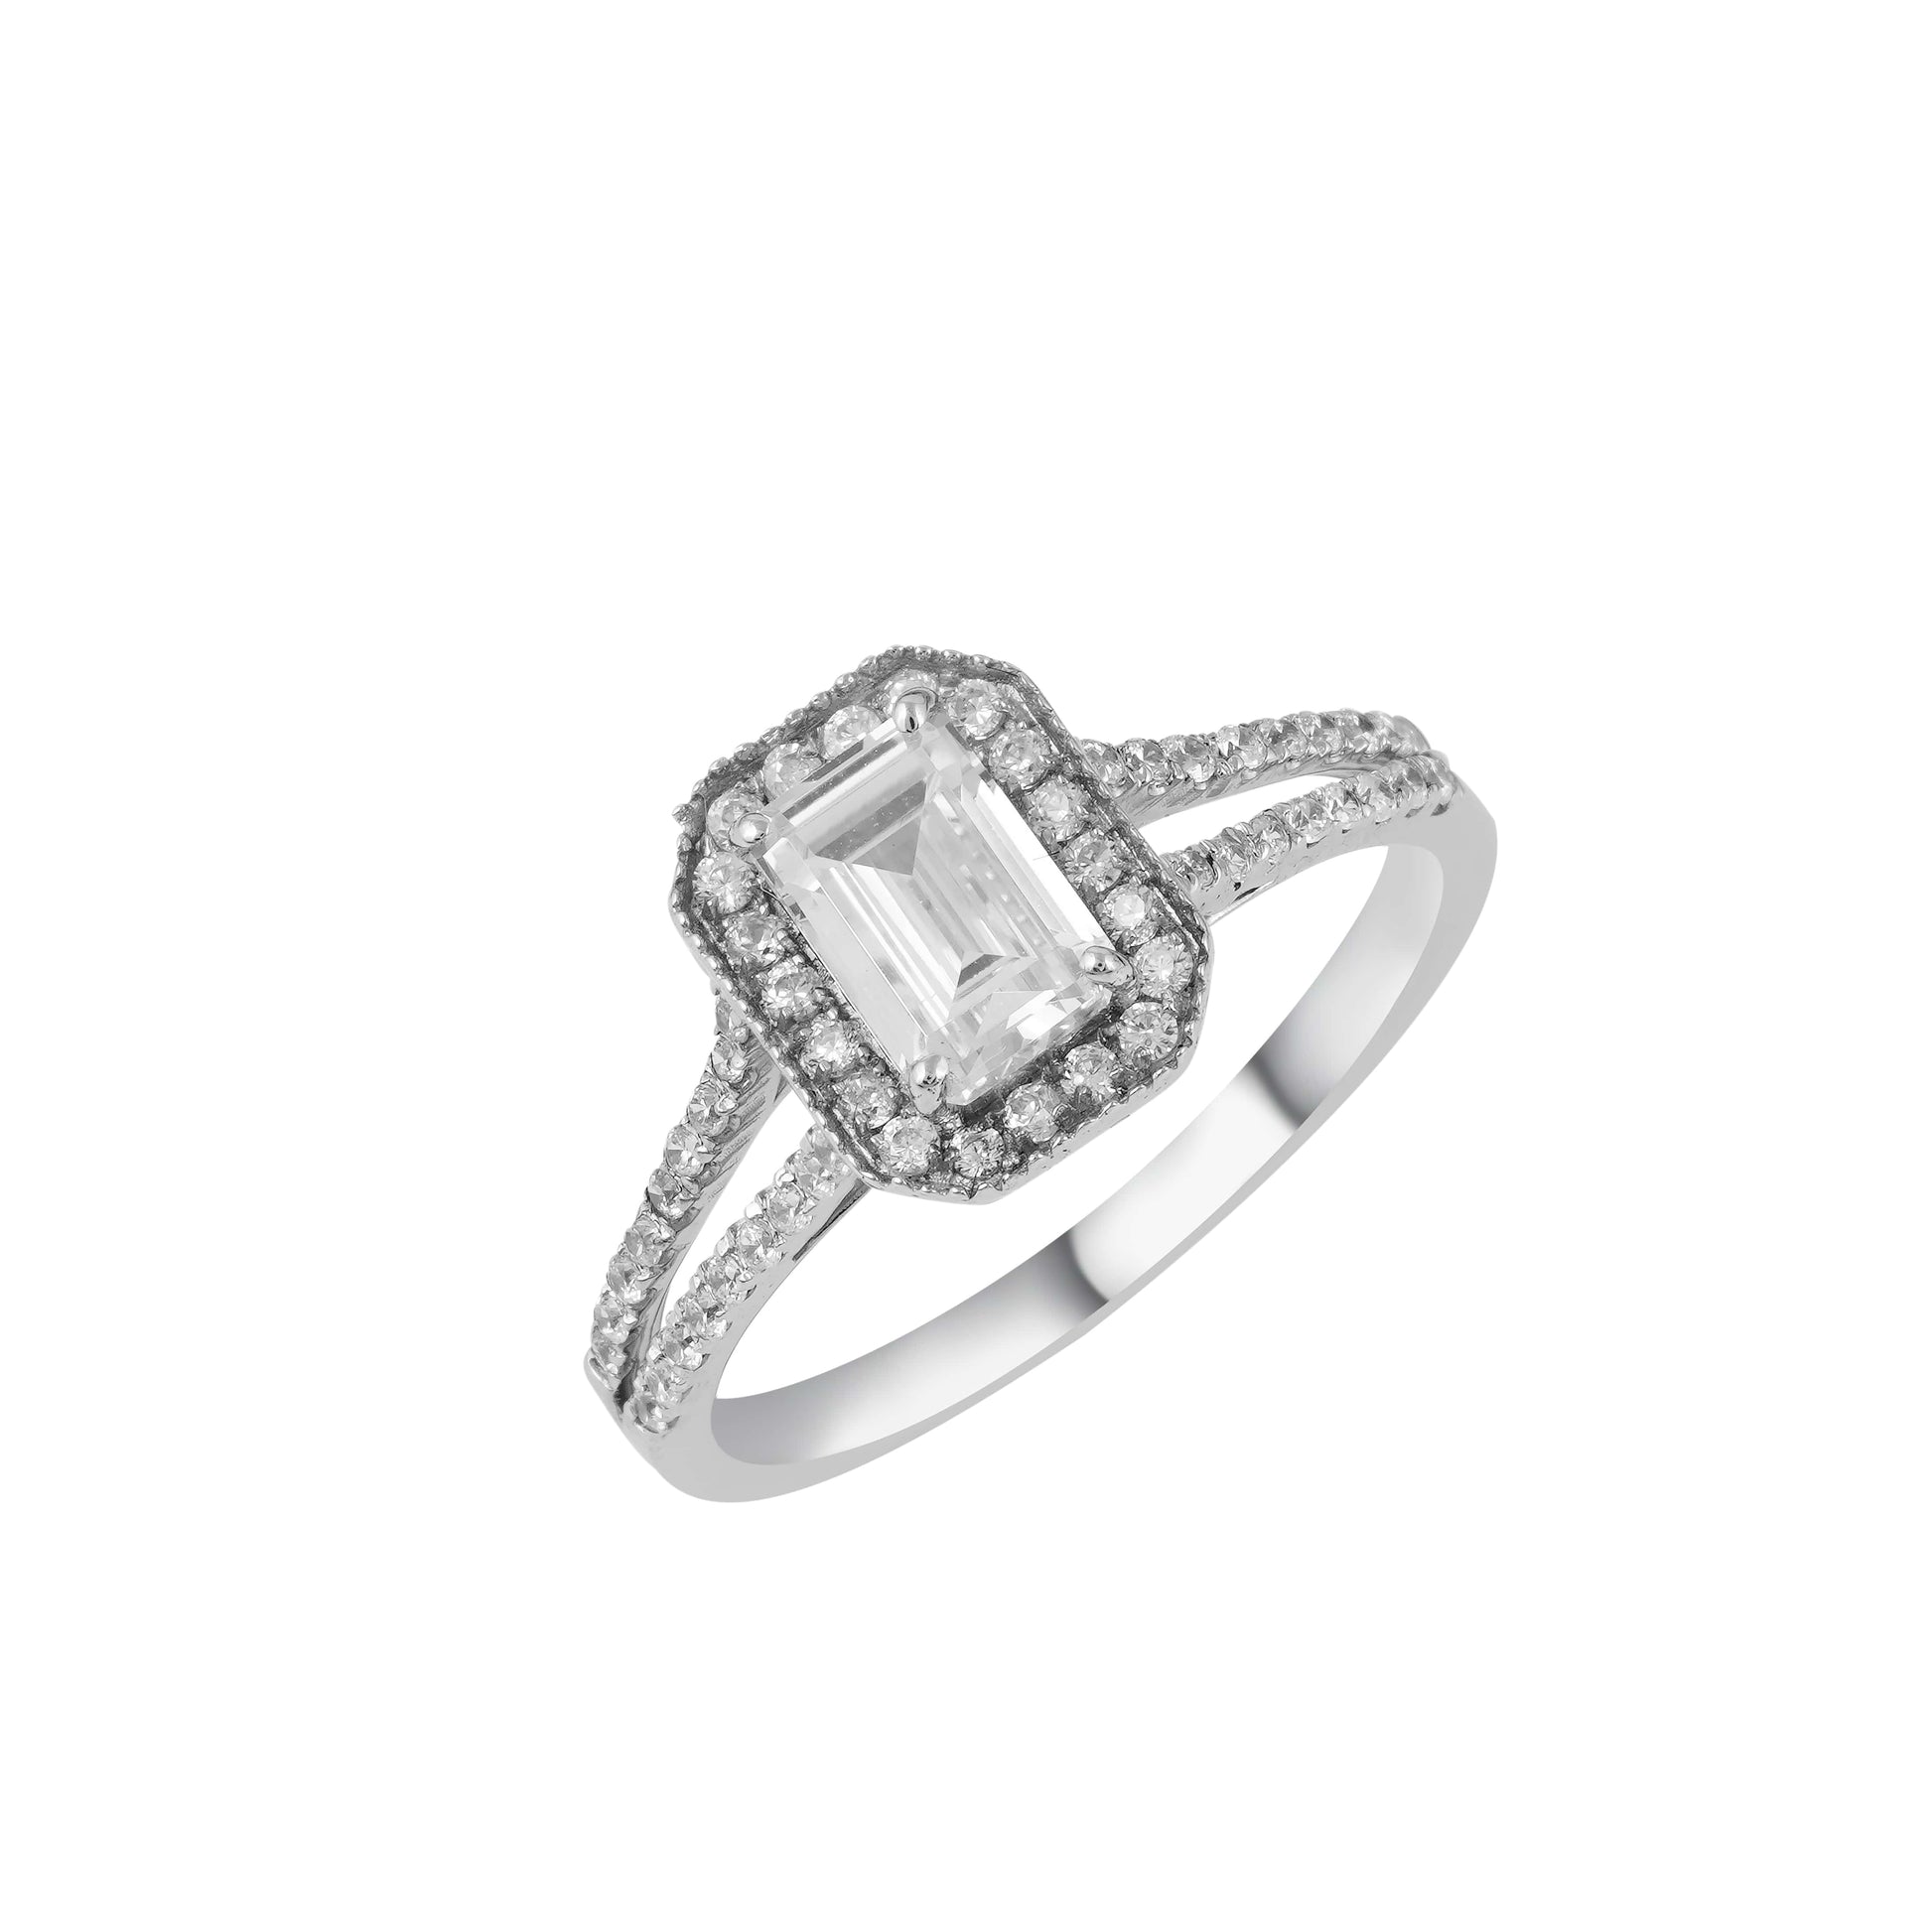 a diamond ring with a white background